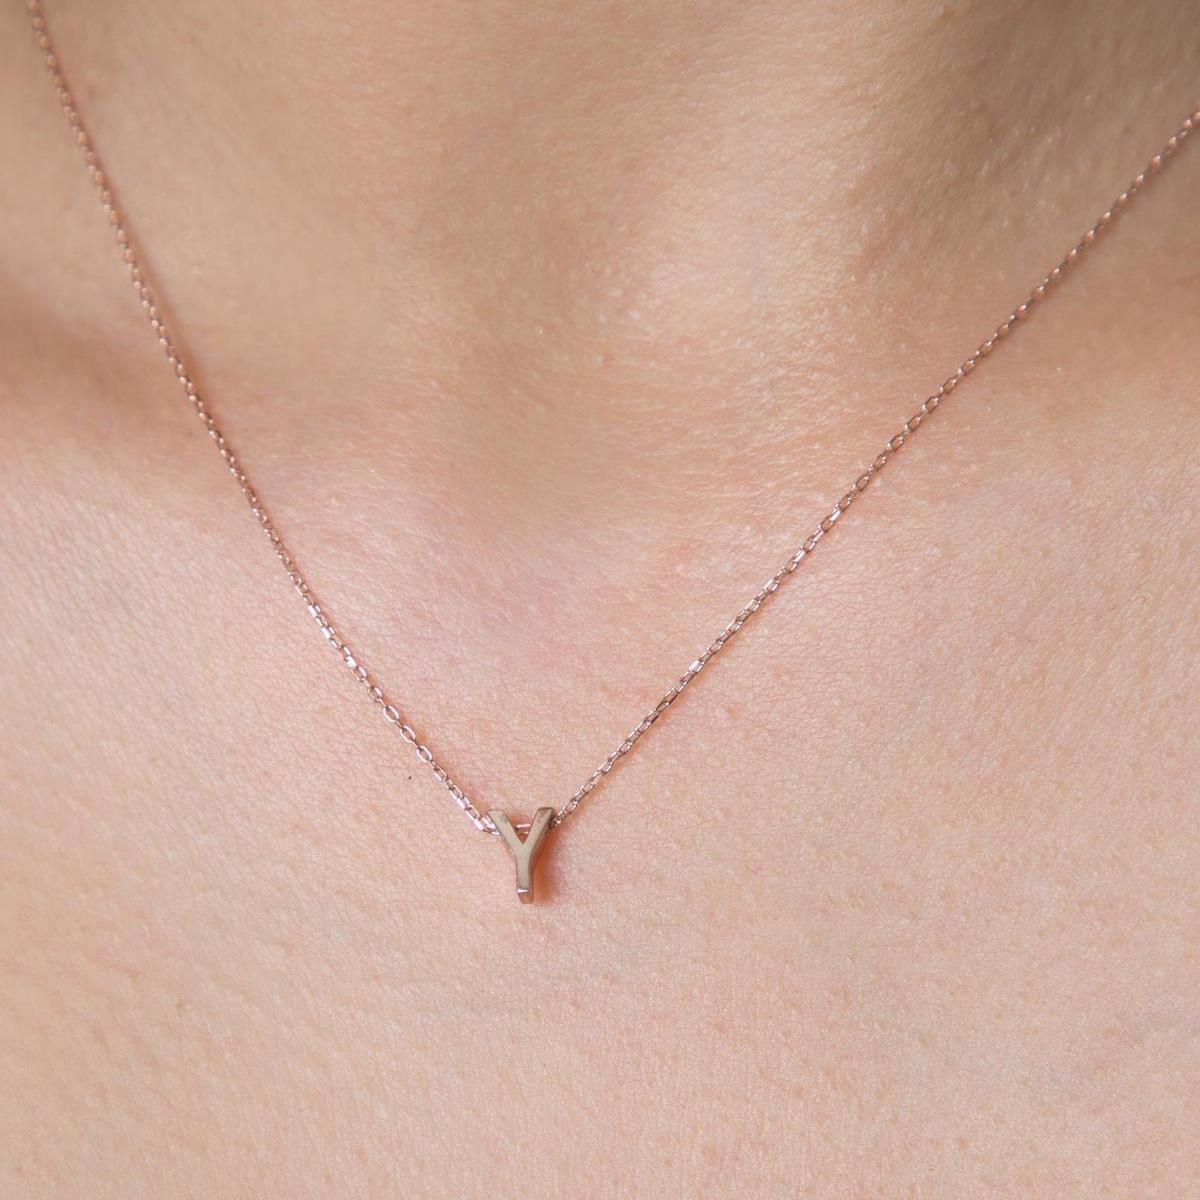 Y Initial Necklace Rose • Rose Gold Initial Necklace • Gift For Her - Trending Silver Gifts